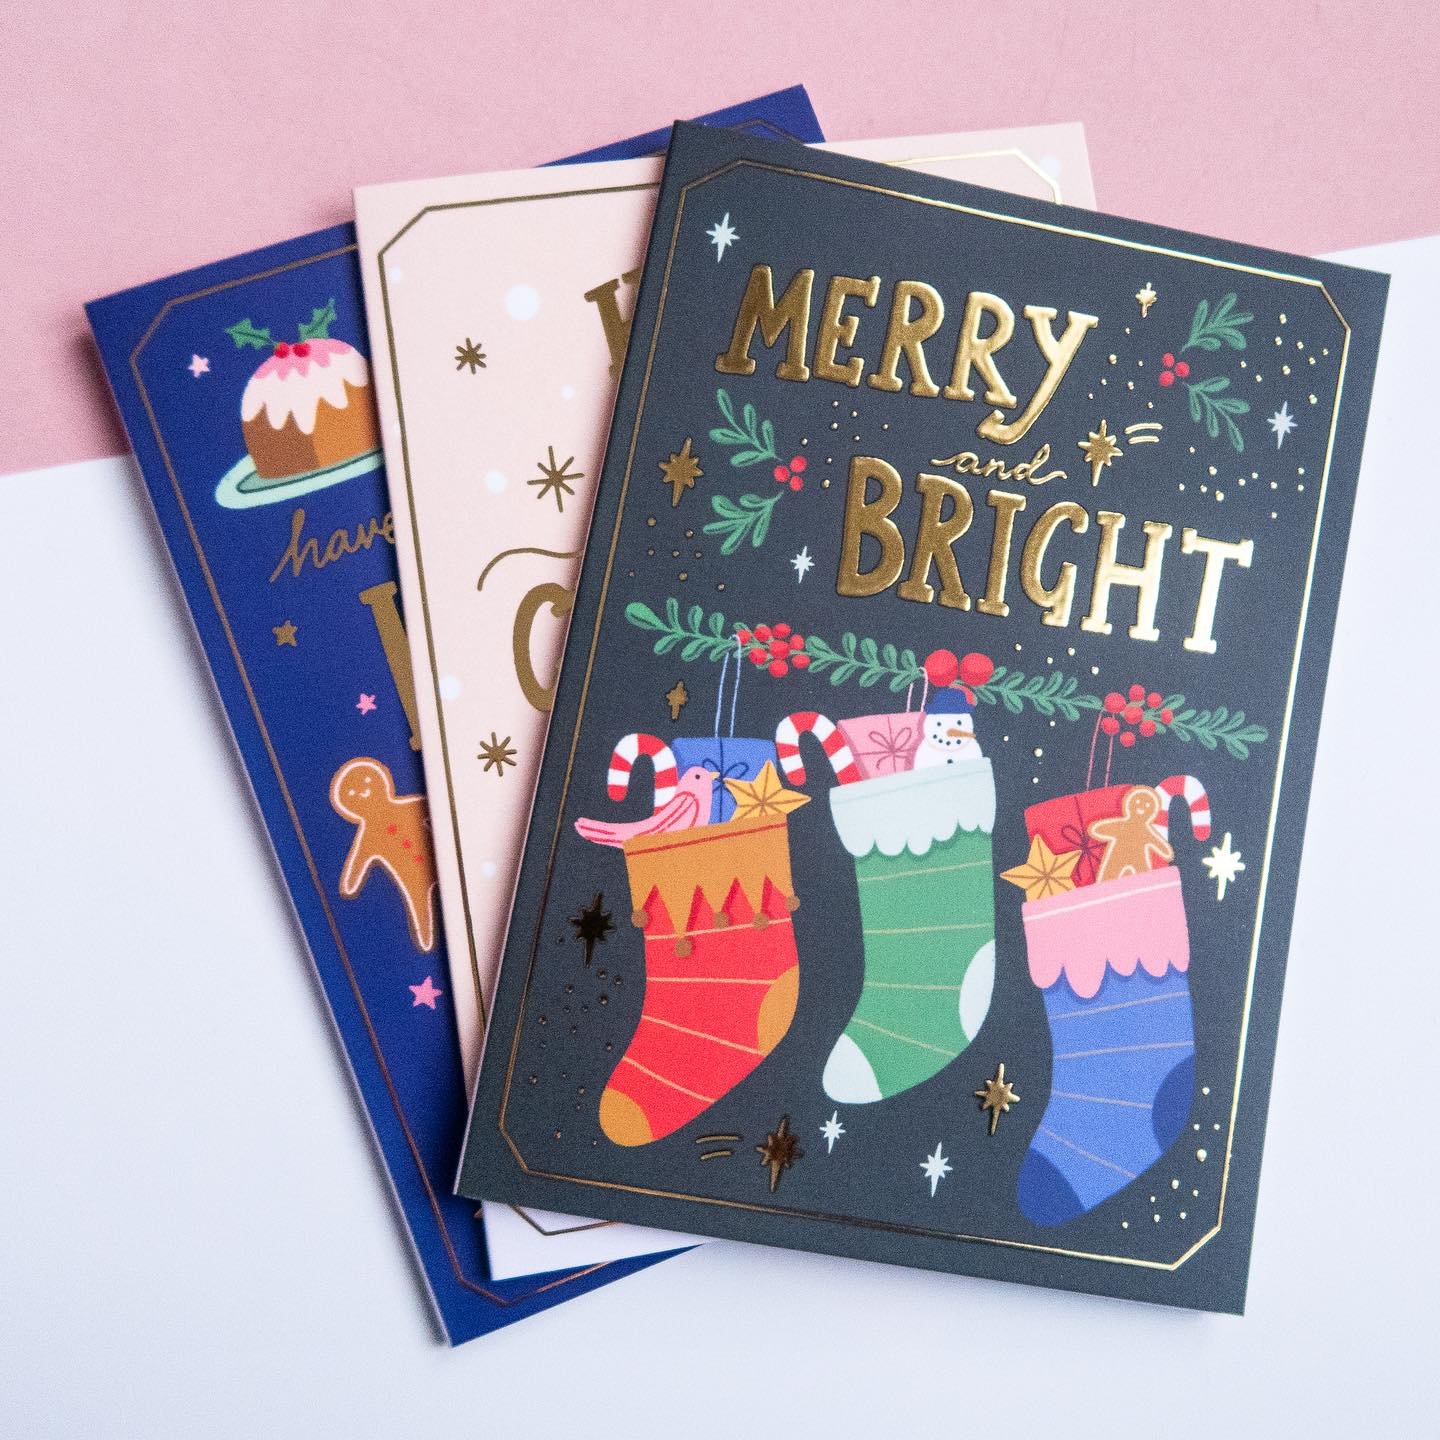 Tis the season to be cosy 🥶 check out the shine on these gold foil christmas cards, all available on my Etsy 🎅🏽🎄 
.
.
#etsychristmas #etsychristmasgifts #christmascards #artistsoninstagram #etsyuk #etsyshopowner #illustrationartists #festivegifts